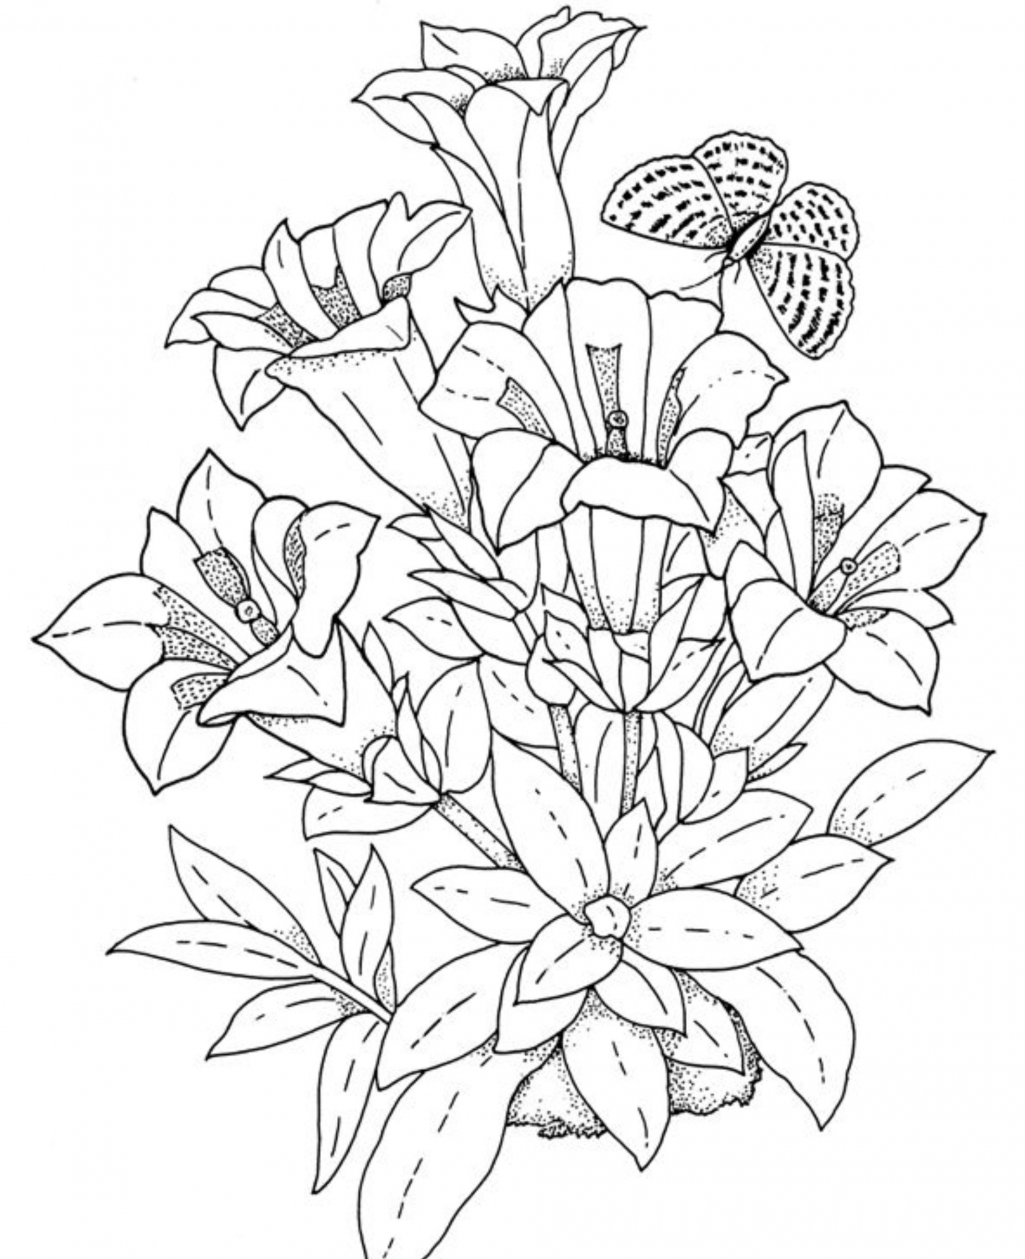 astonishing detailed flower coloring pages in flower coloring coloring pages of detailed flowers coloring pages of detailed flowers